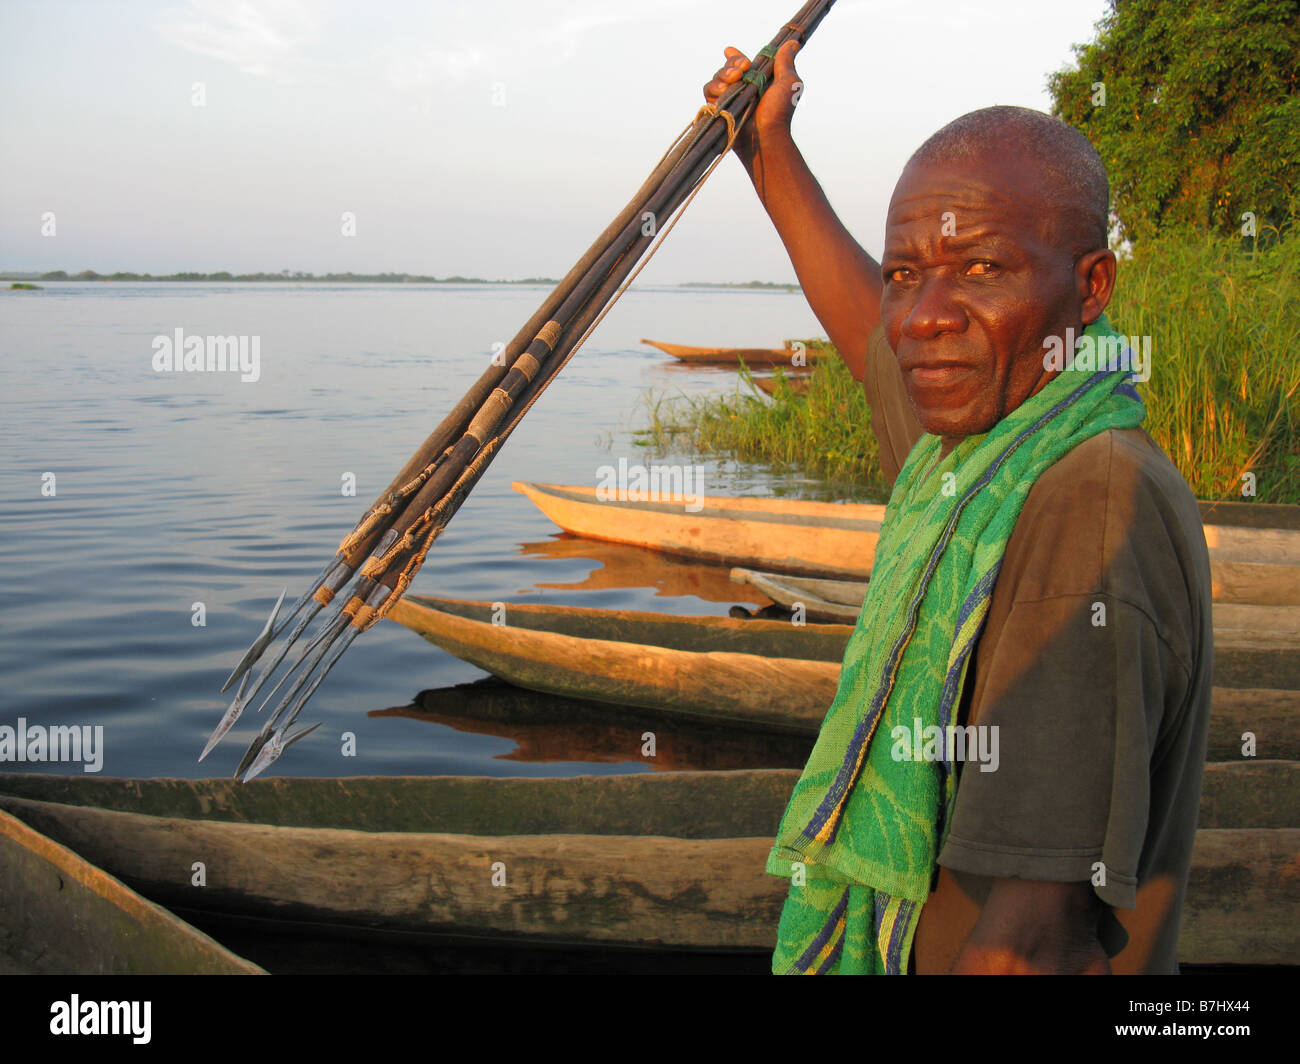 Congo River fisherman in dugout canoe with harpoon spears 